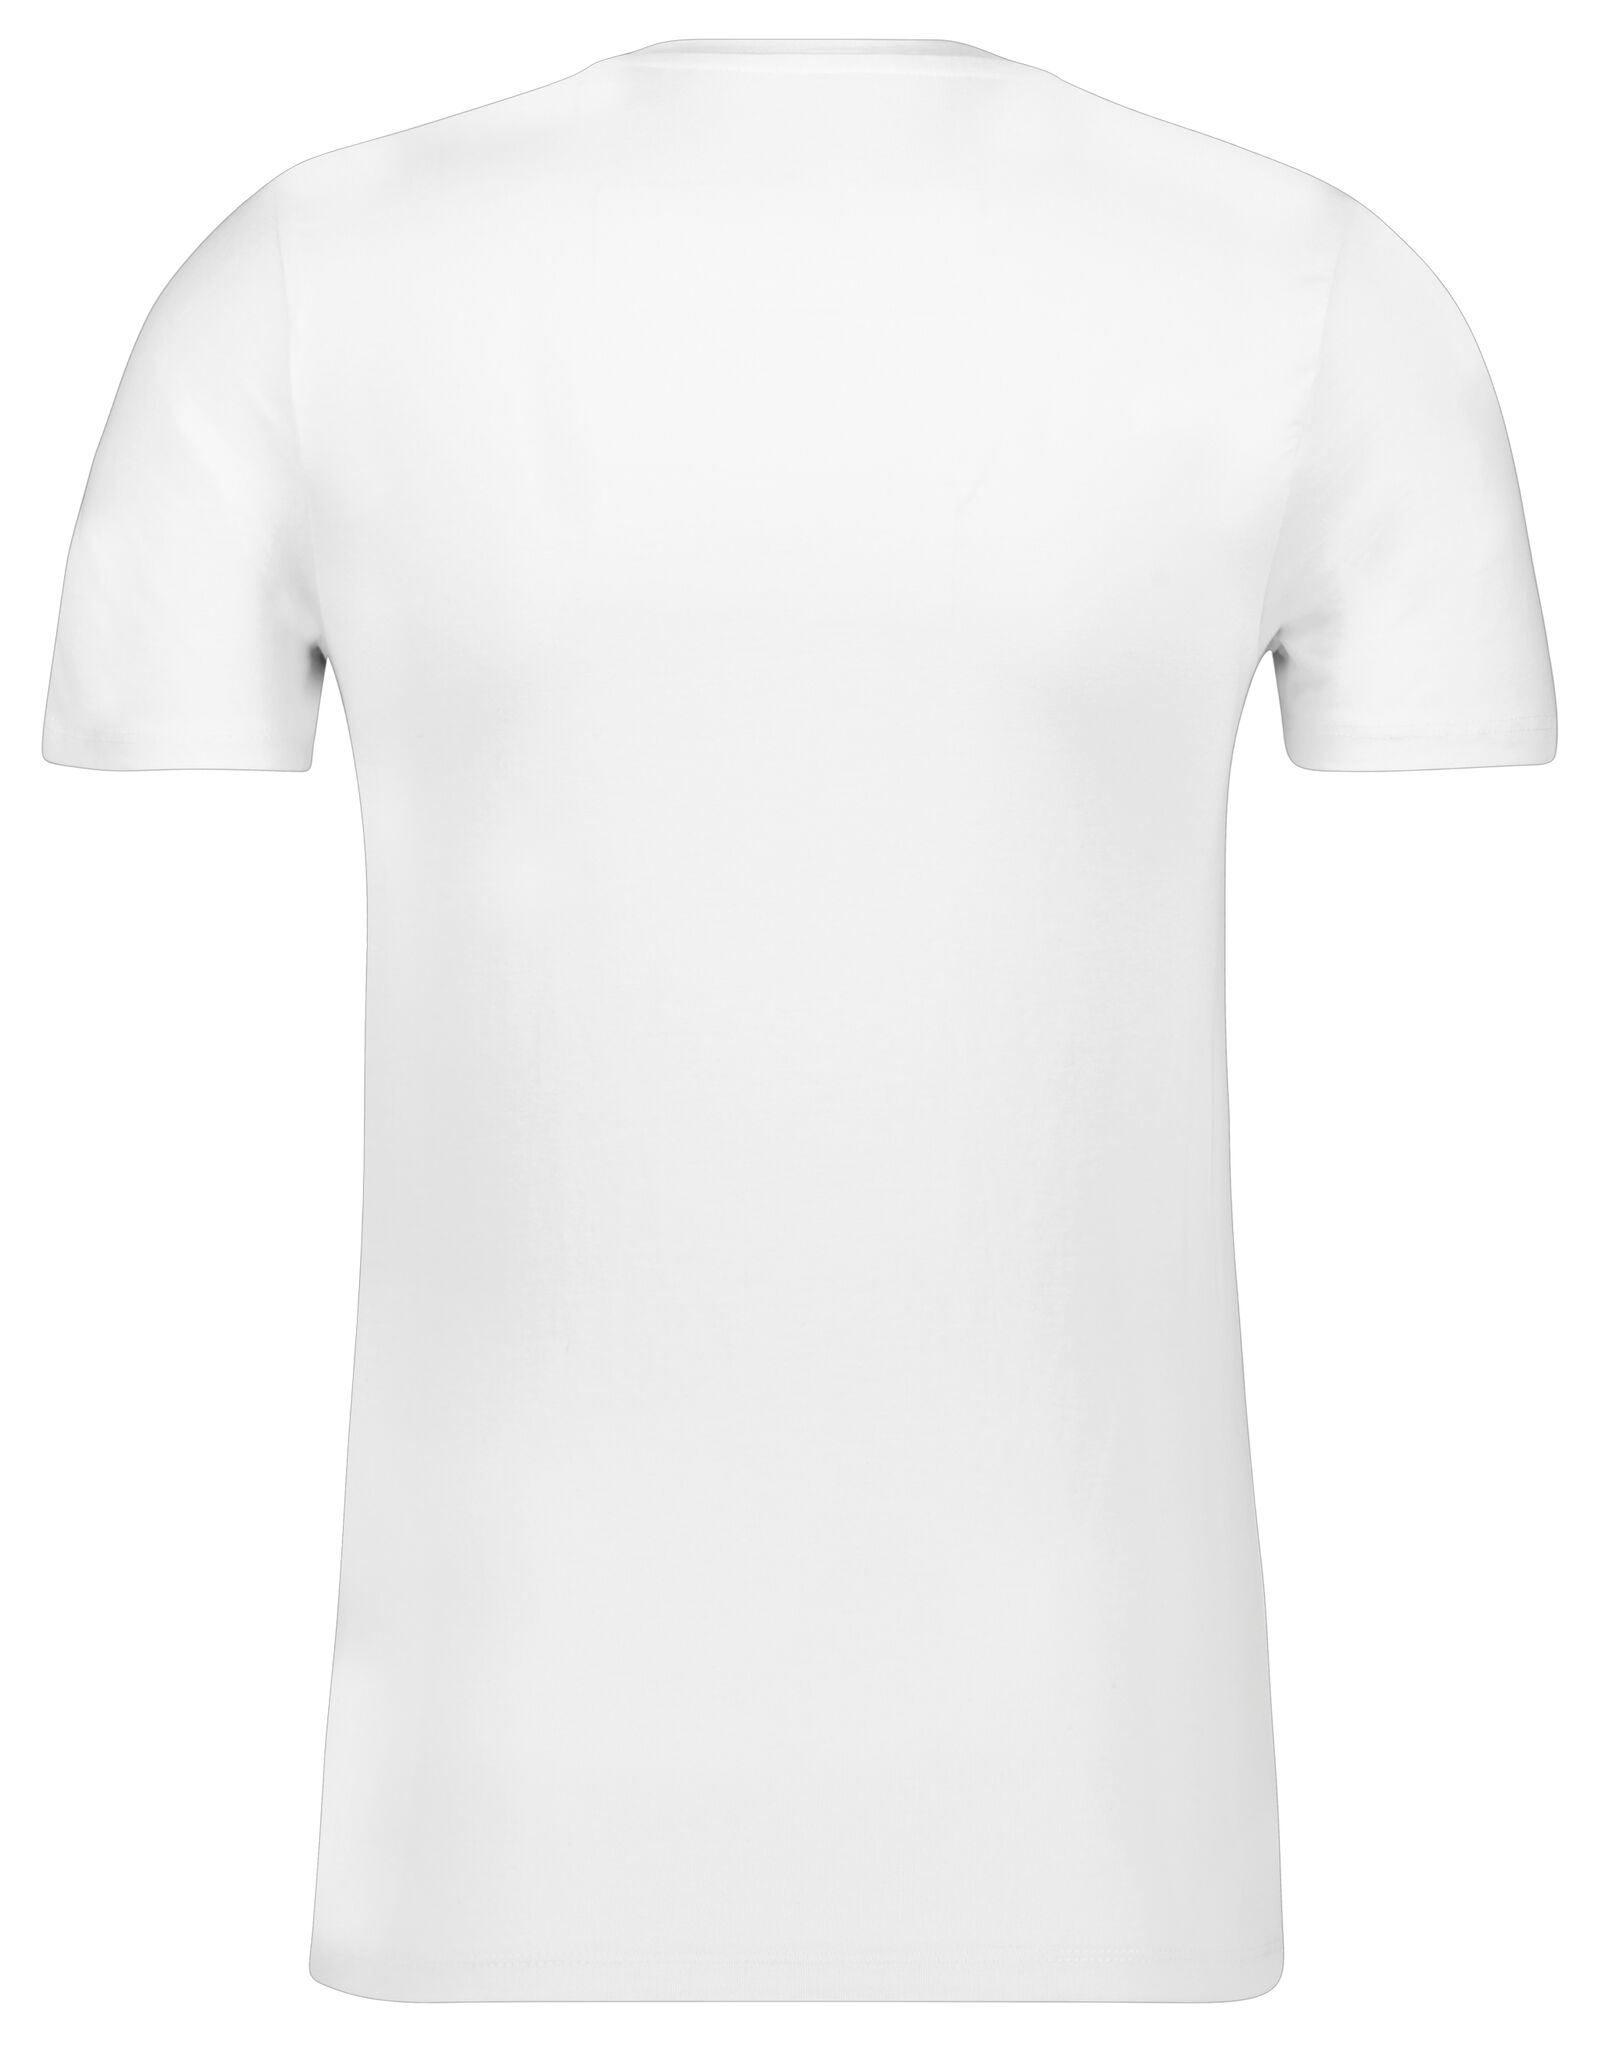 t-shirt homme slim fit col rond - extra long blanc S - 34276843 - HEMA